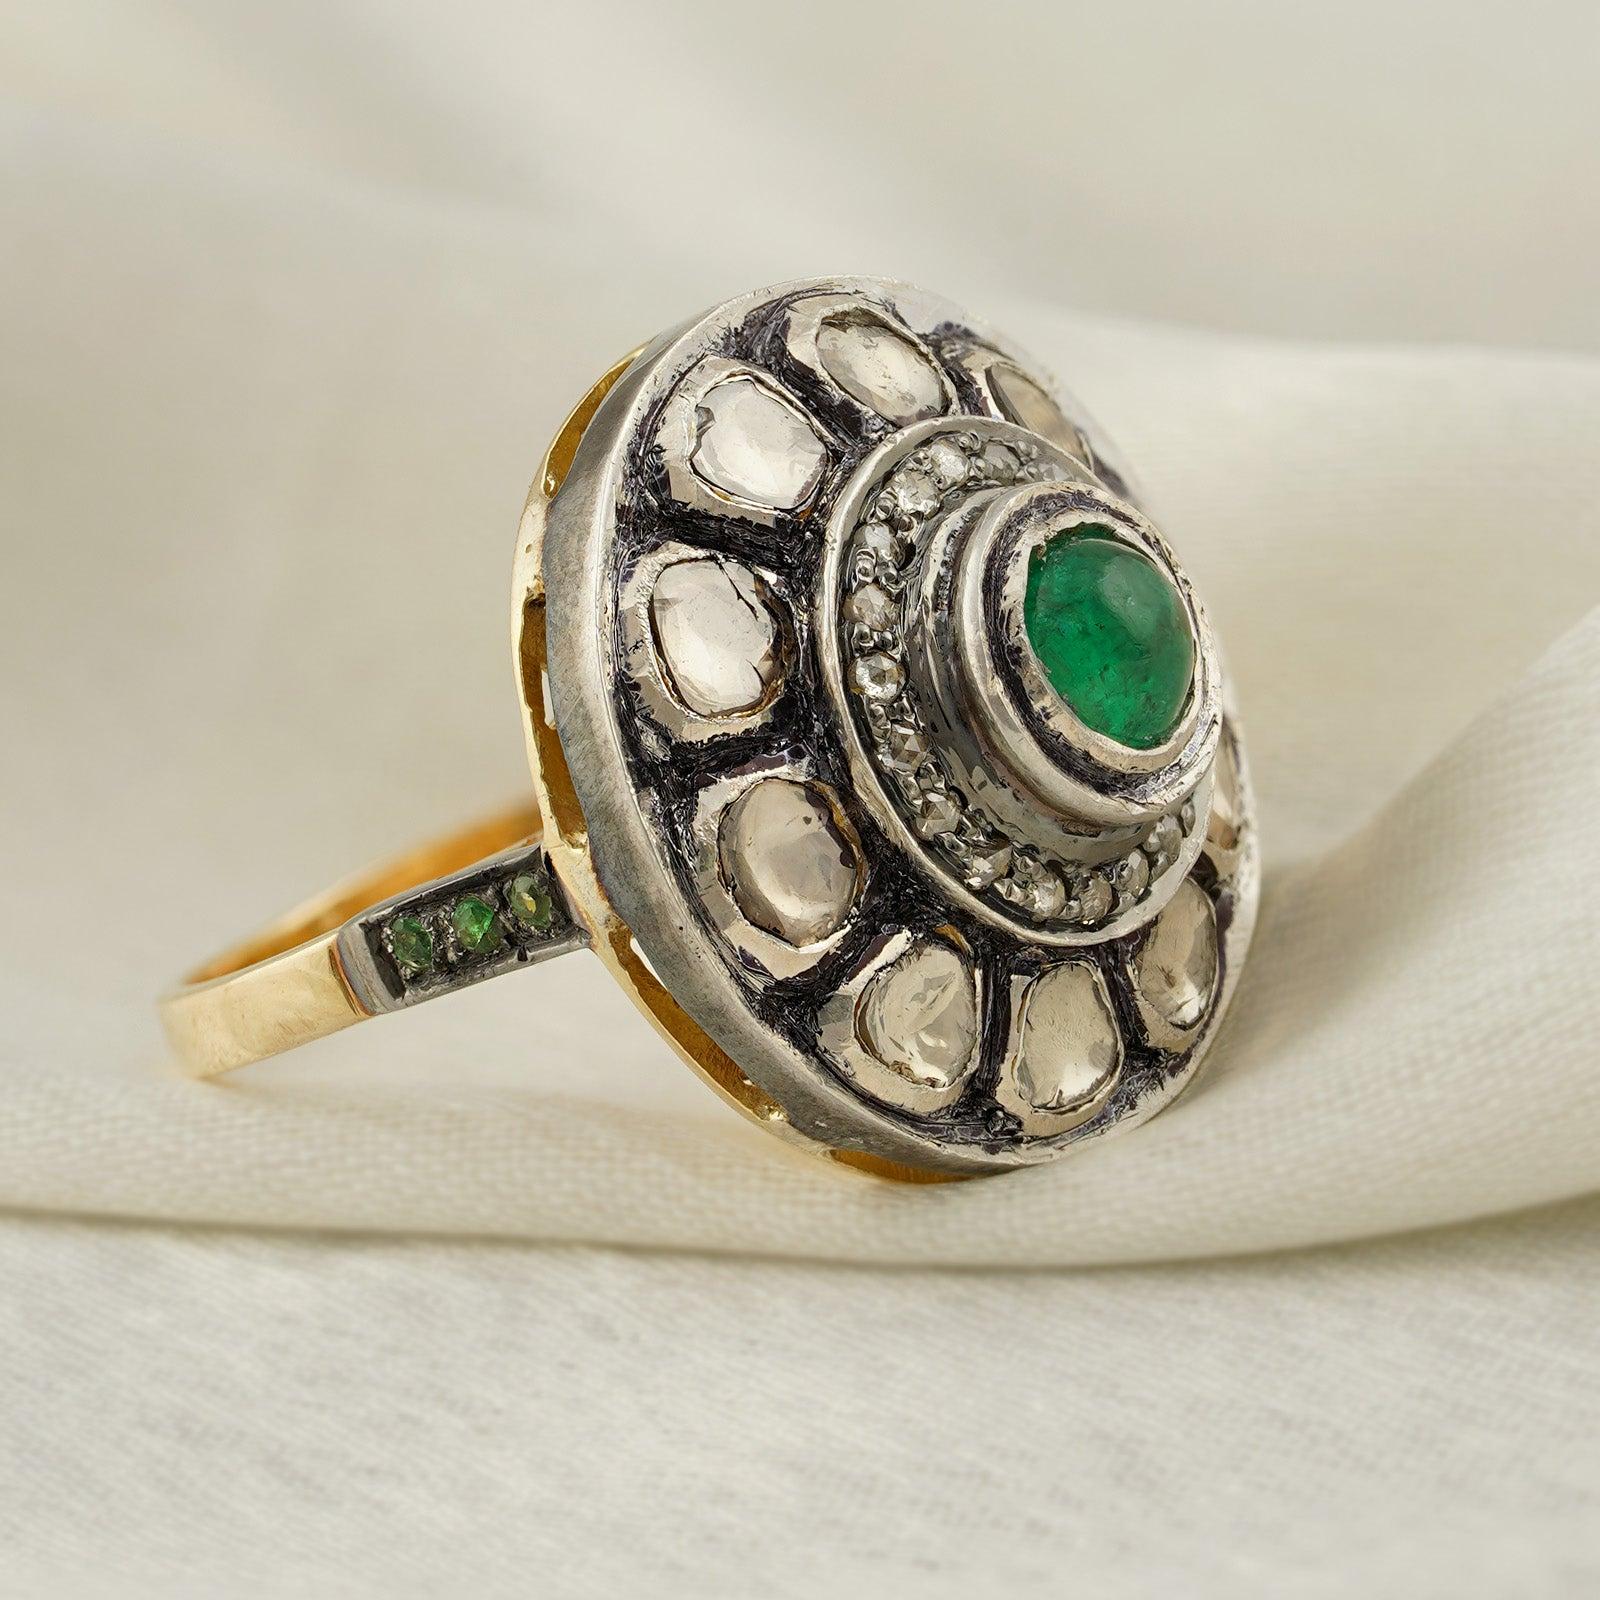 For Sale:  Moi Jaipur Uncut Diamond and Emerald Ring 3